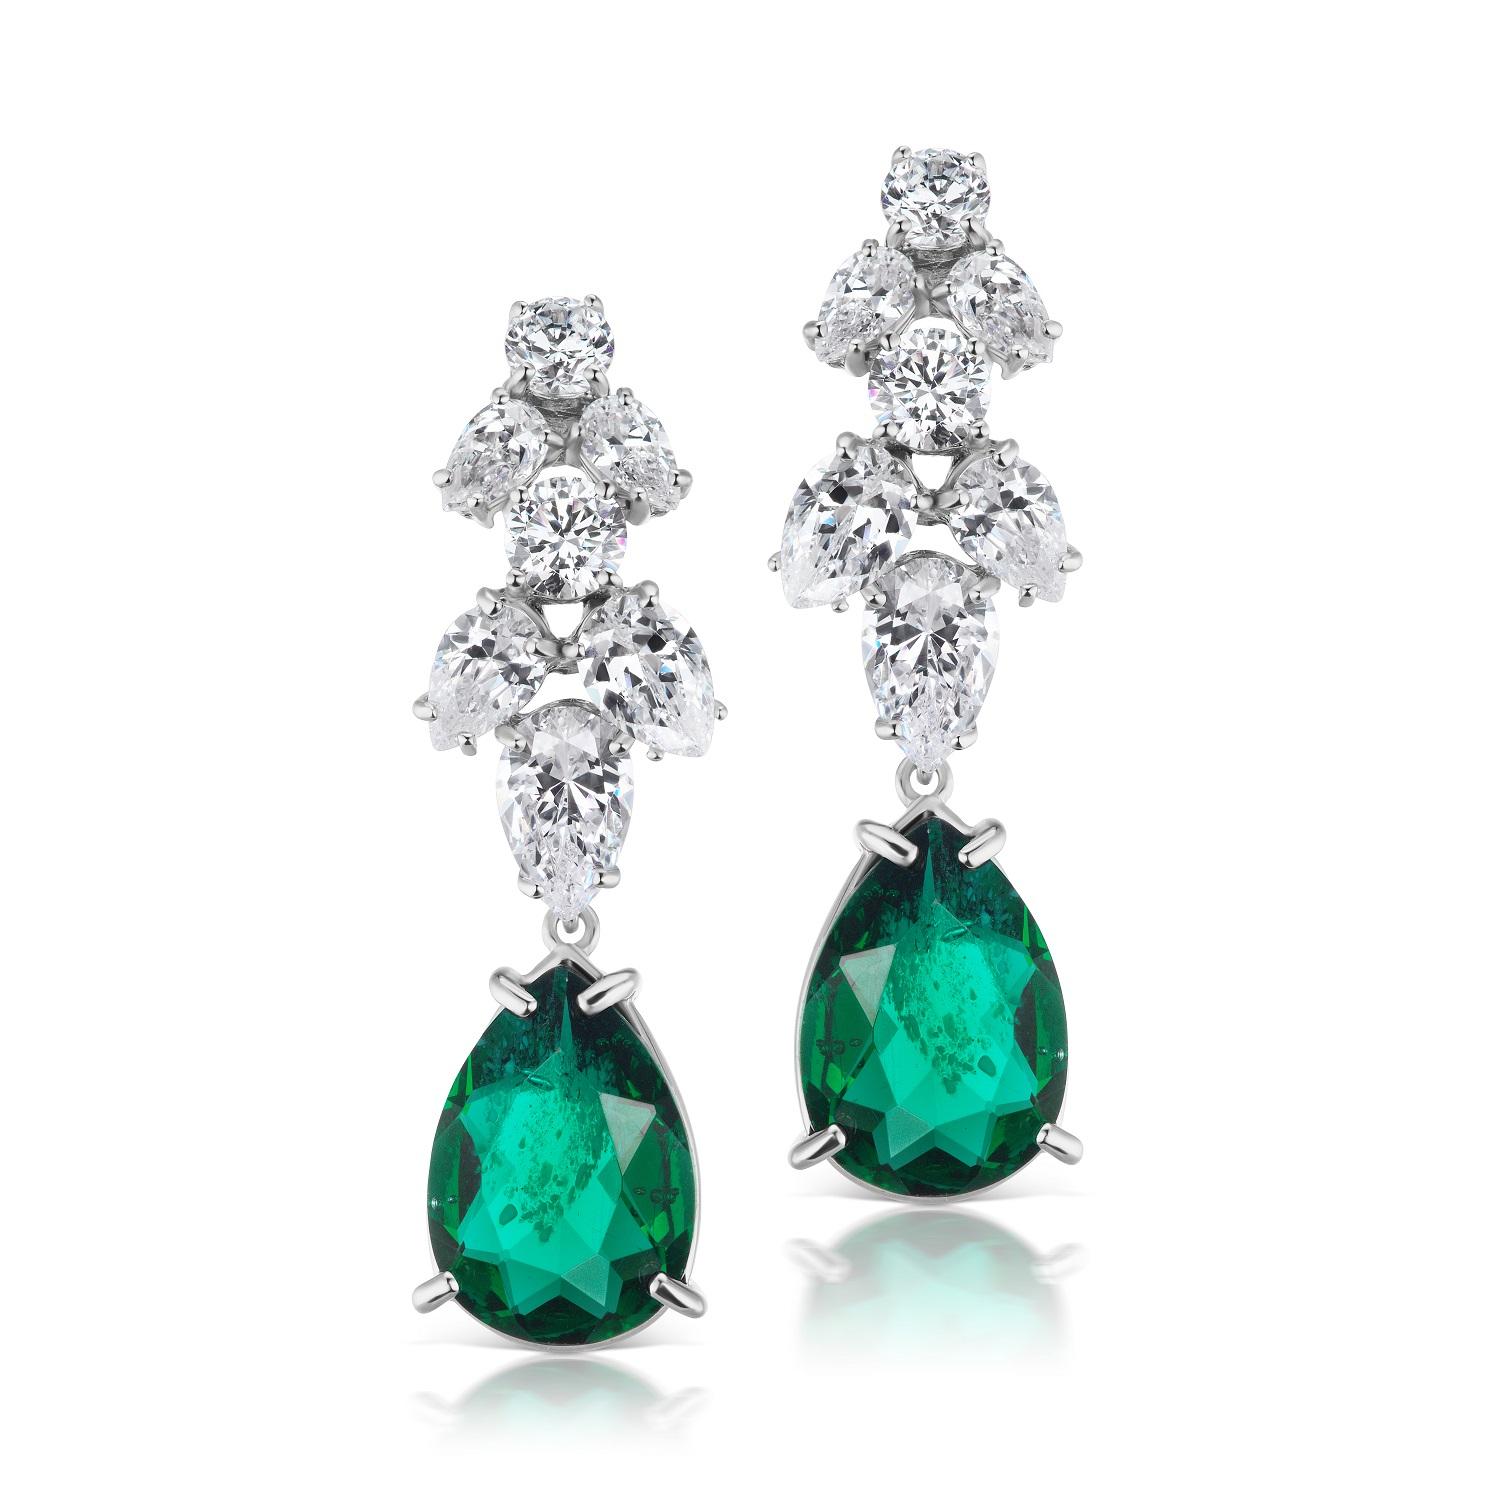 Magnificent Costume Jewelry synthetic emerald diamond delicate chandelier earrings set with marquise, pear shape and round CZ with synthetic emerald in rhodium sterling measures 2 inches long.